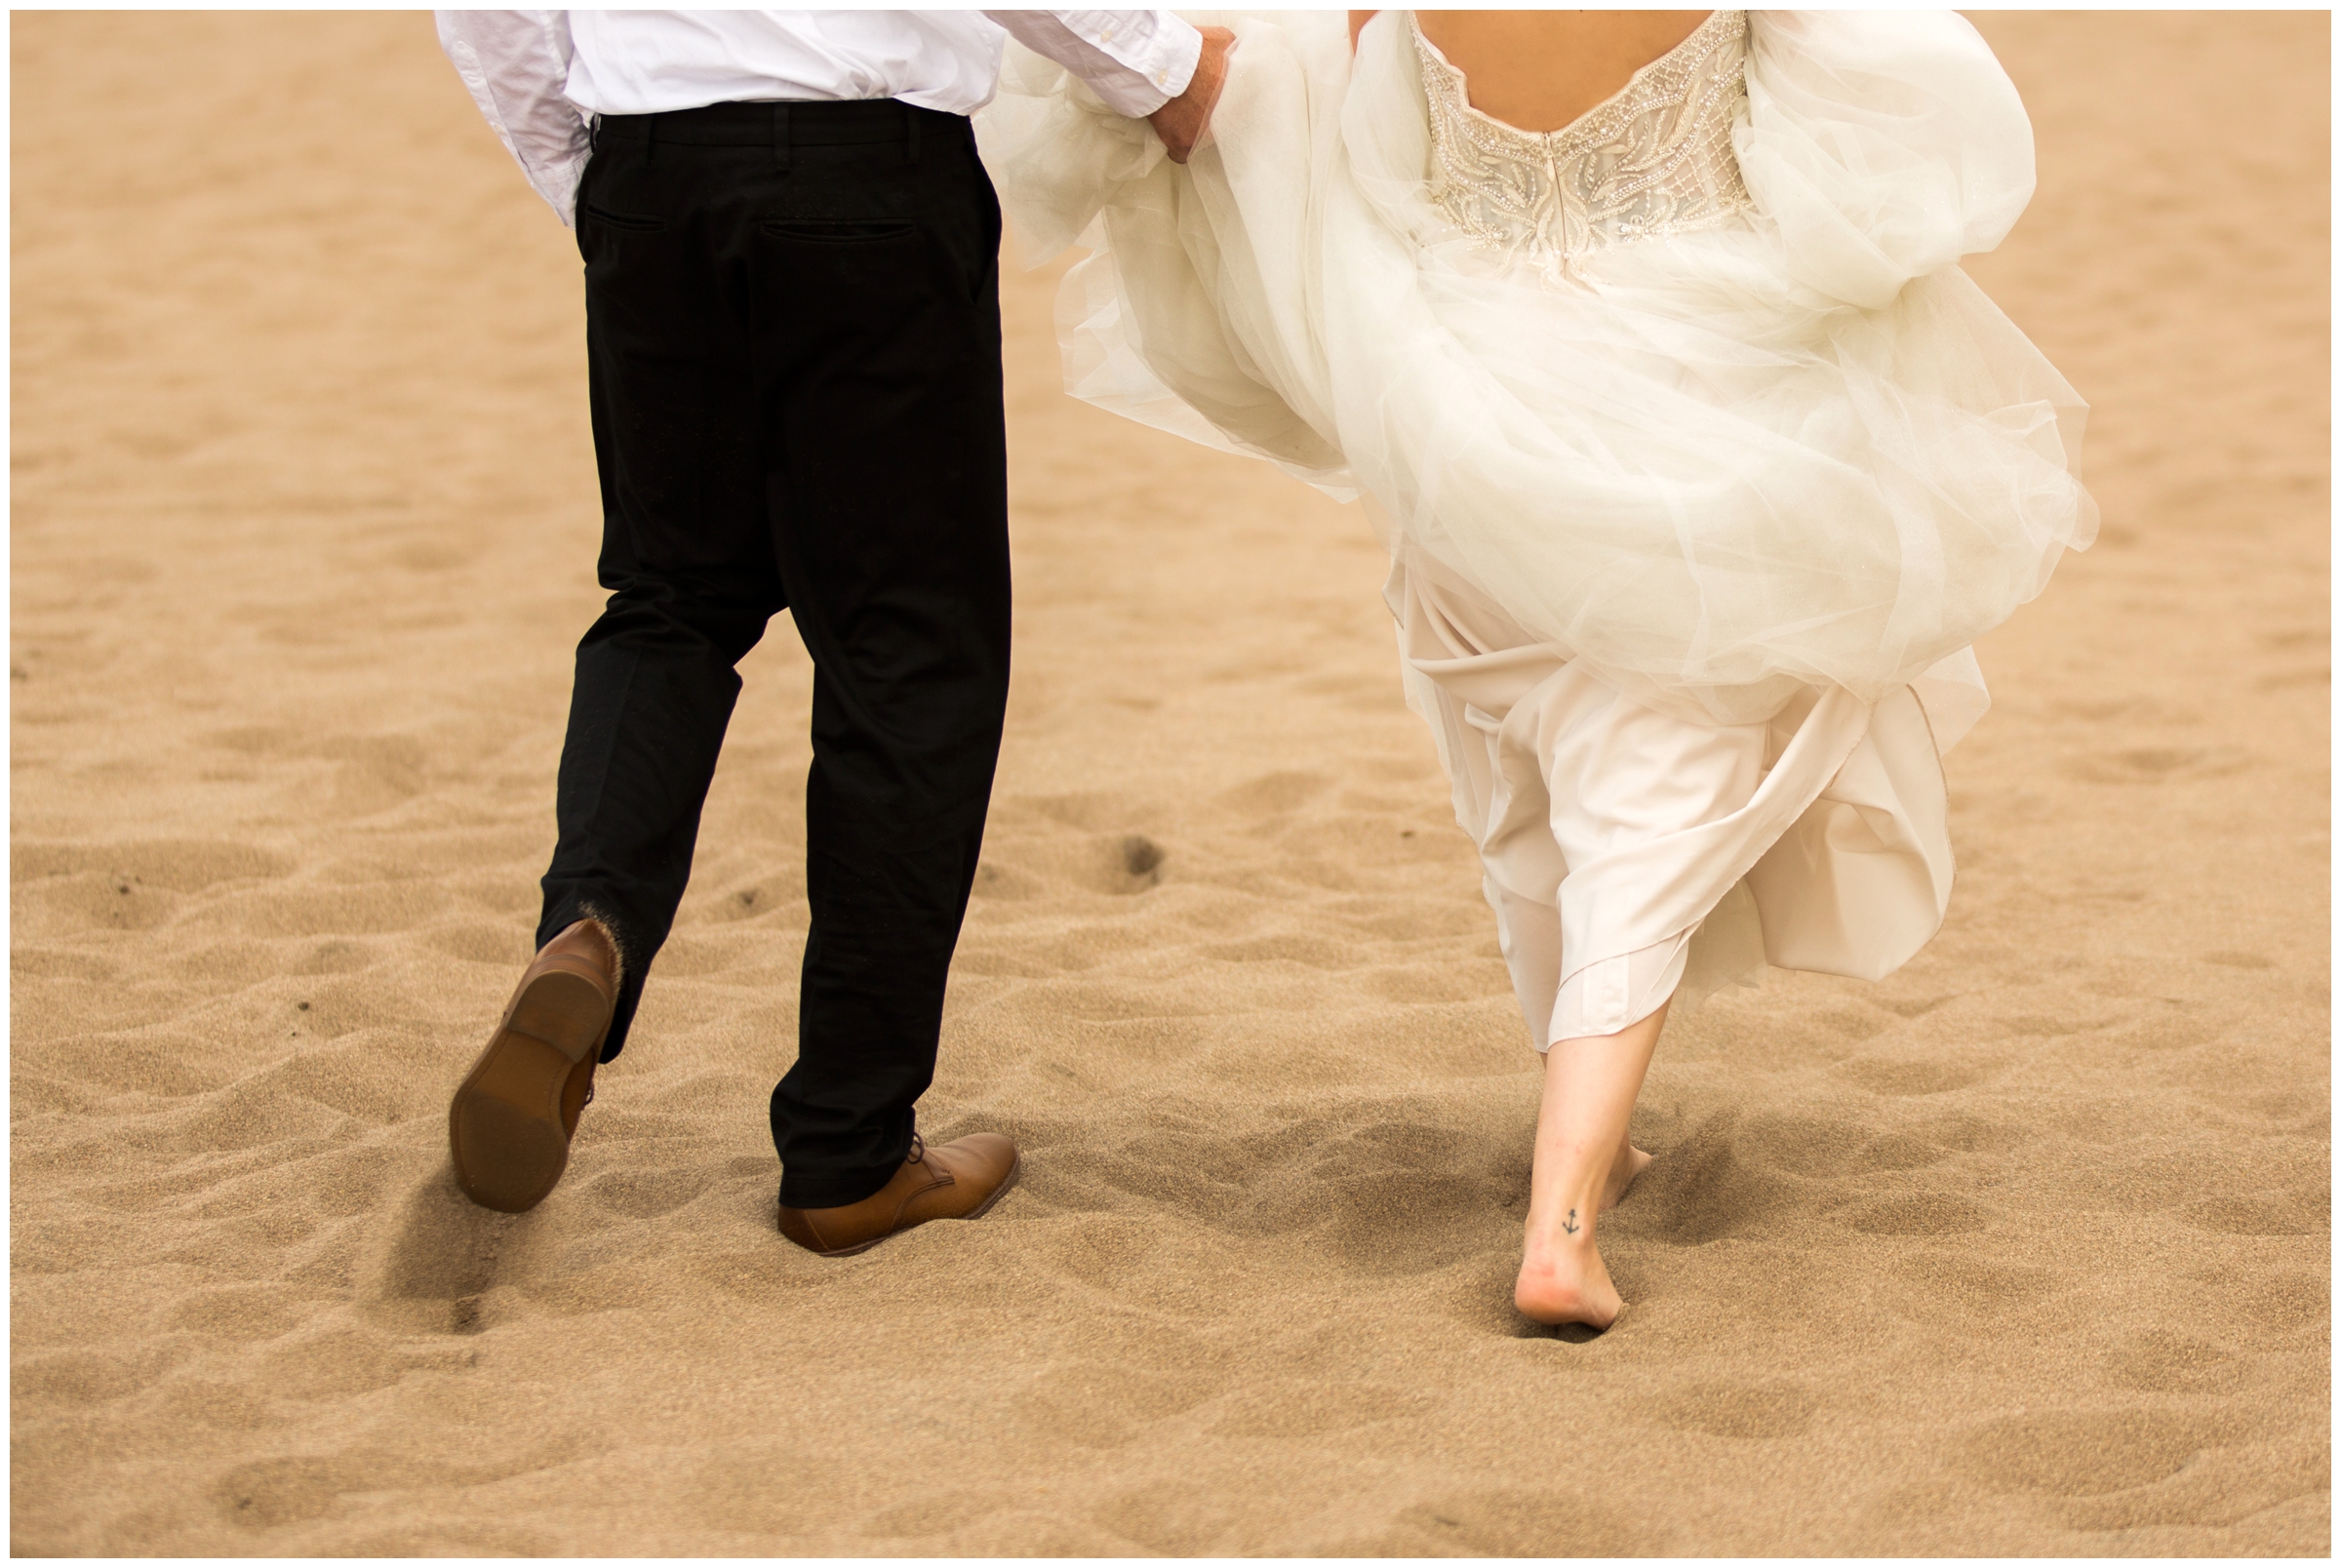 groom holding bride's dress as they walk on the beach